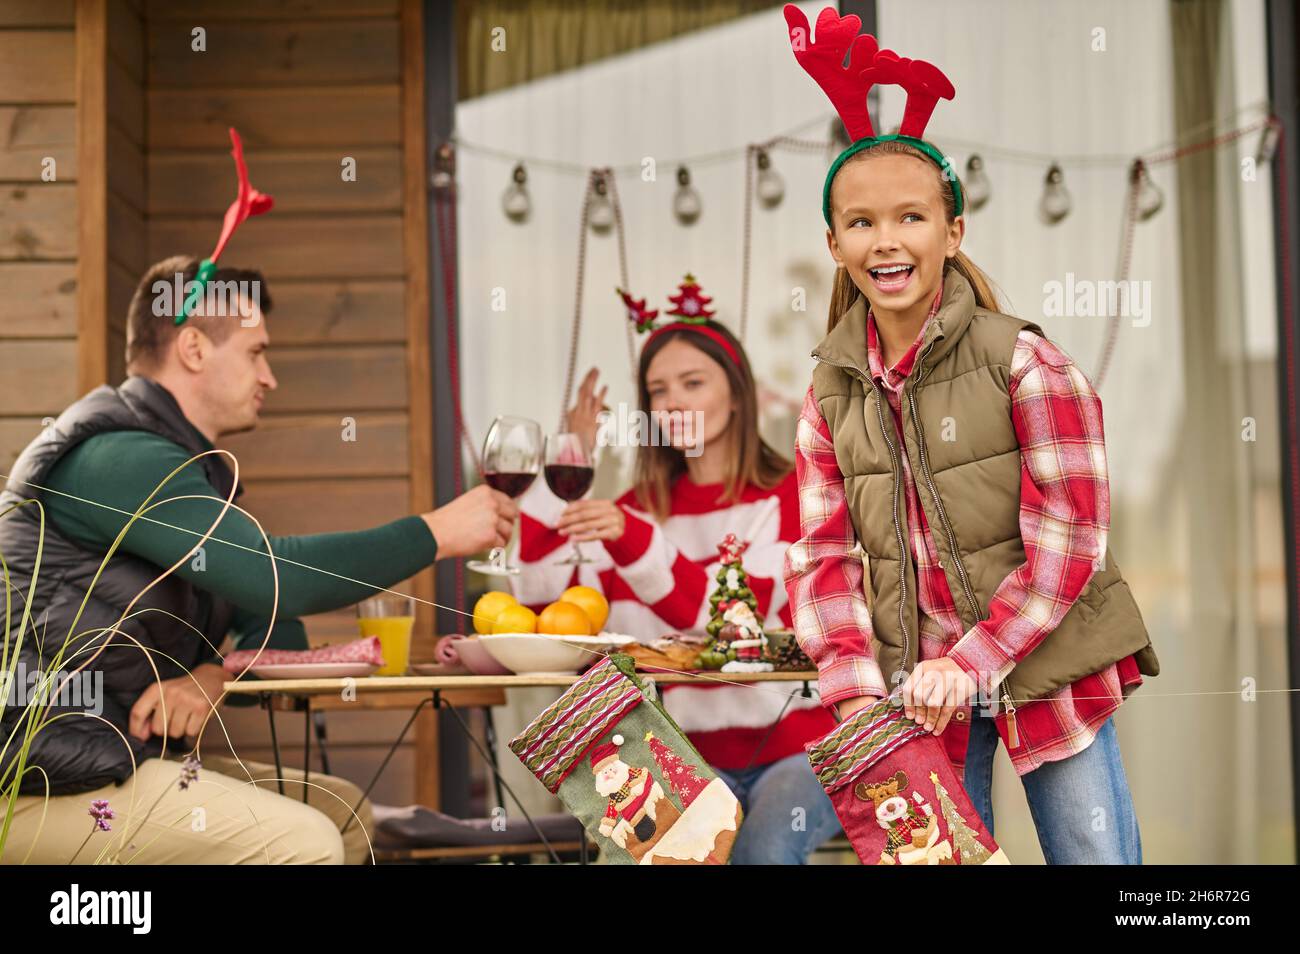 A famly celebrating christmas in a country house Stock Photo